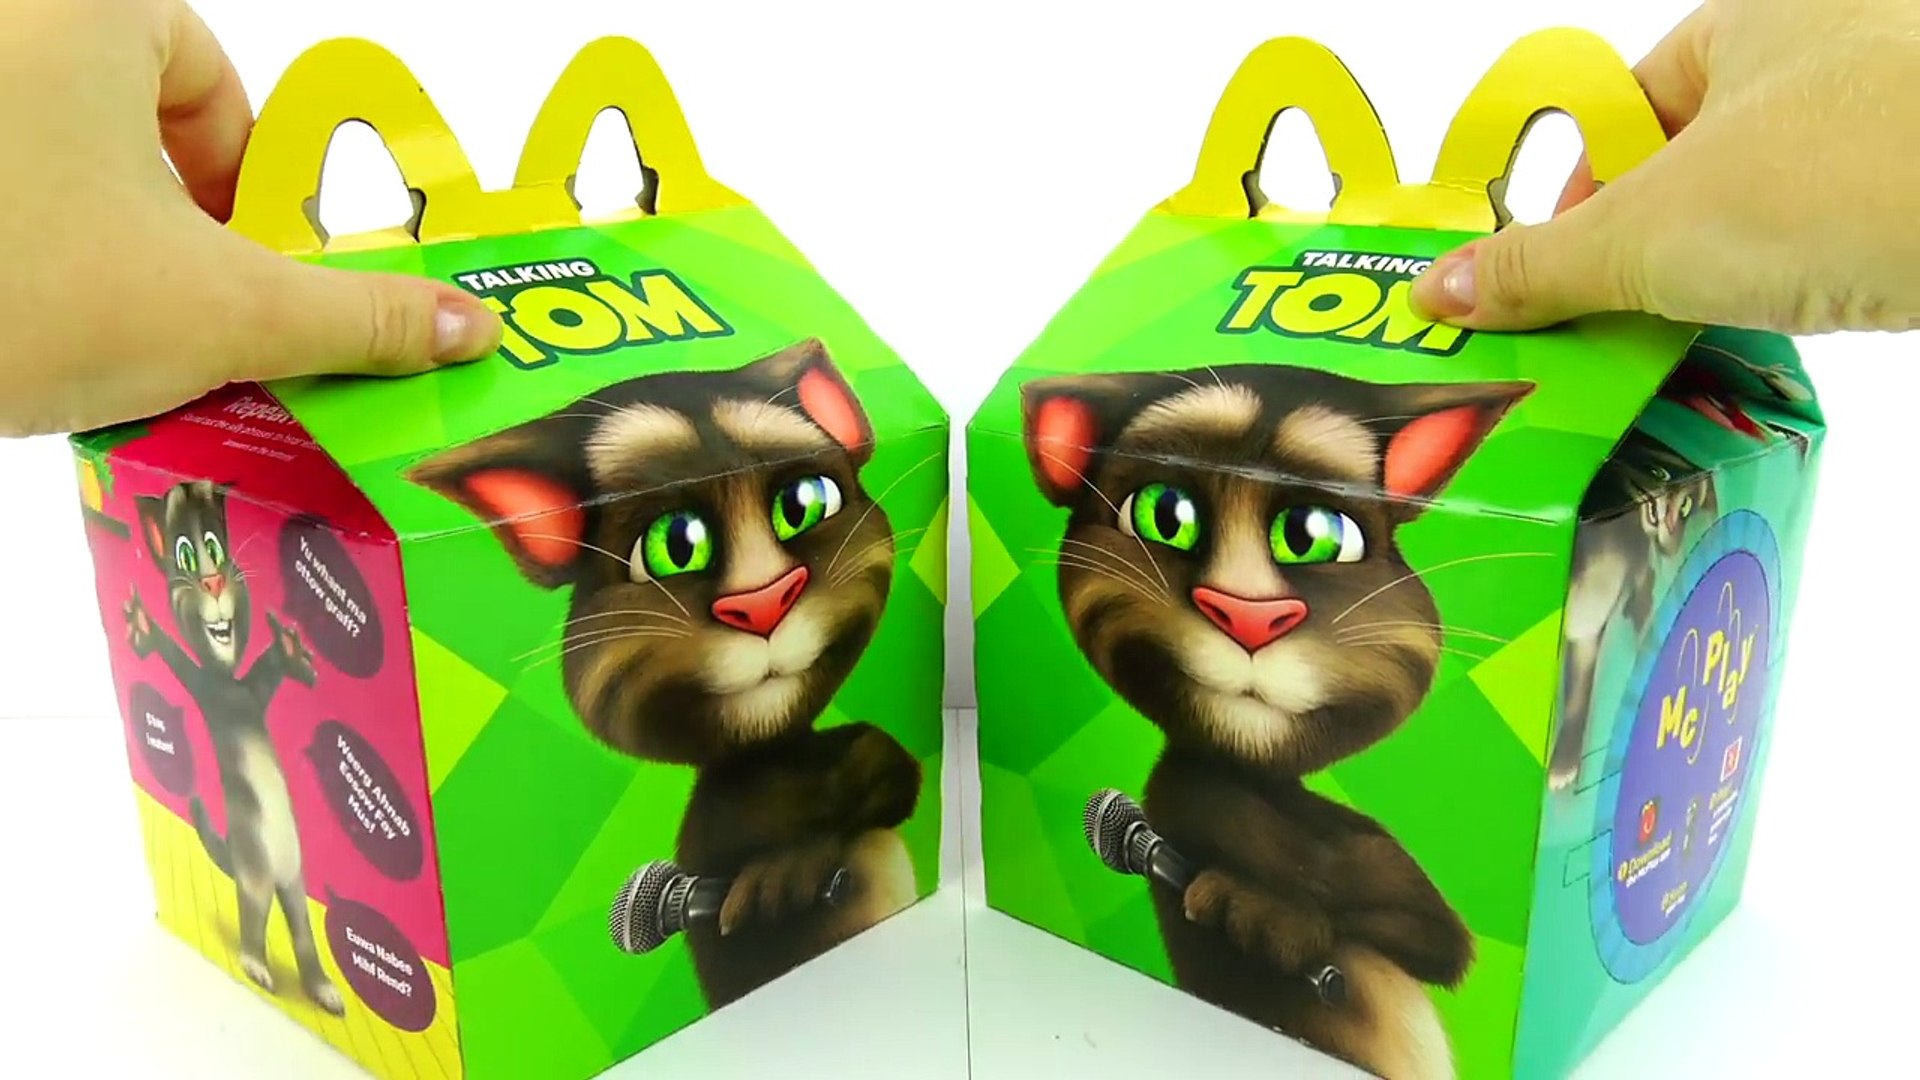 McDonalds TALKING TOM HAPPY MEAL TOYS FULL SET OF 12, Collection 2016 -  Vídeo Dailymotion